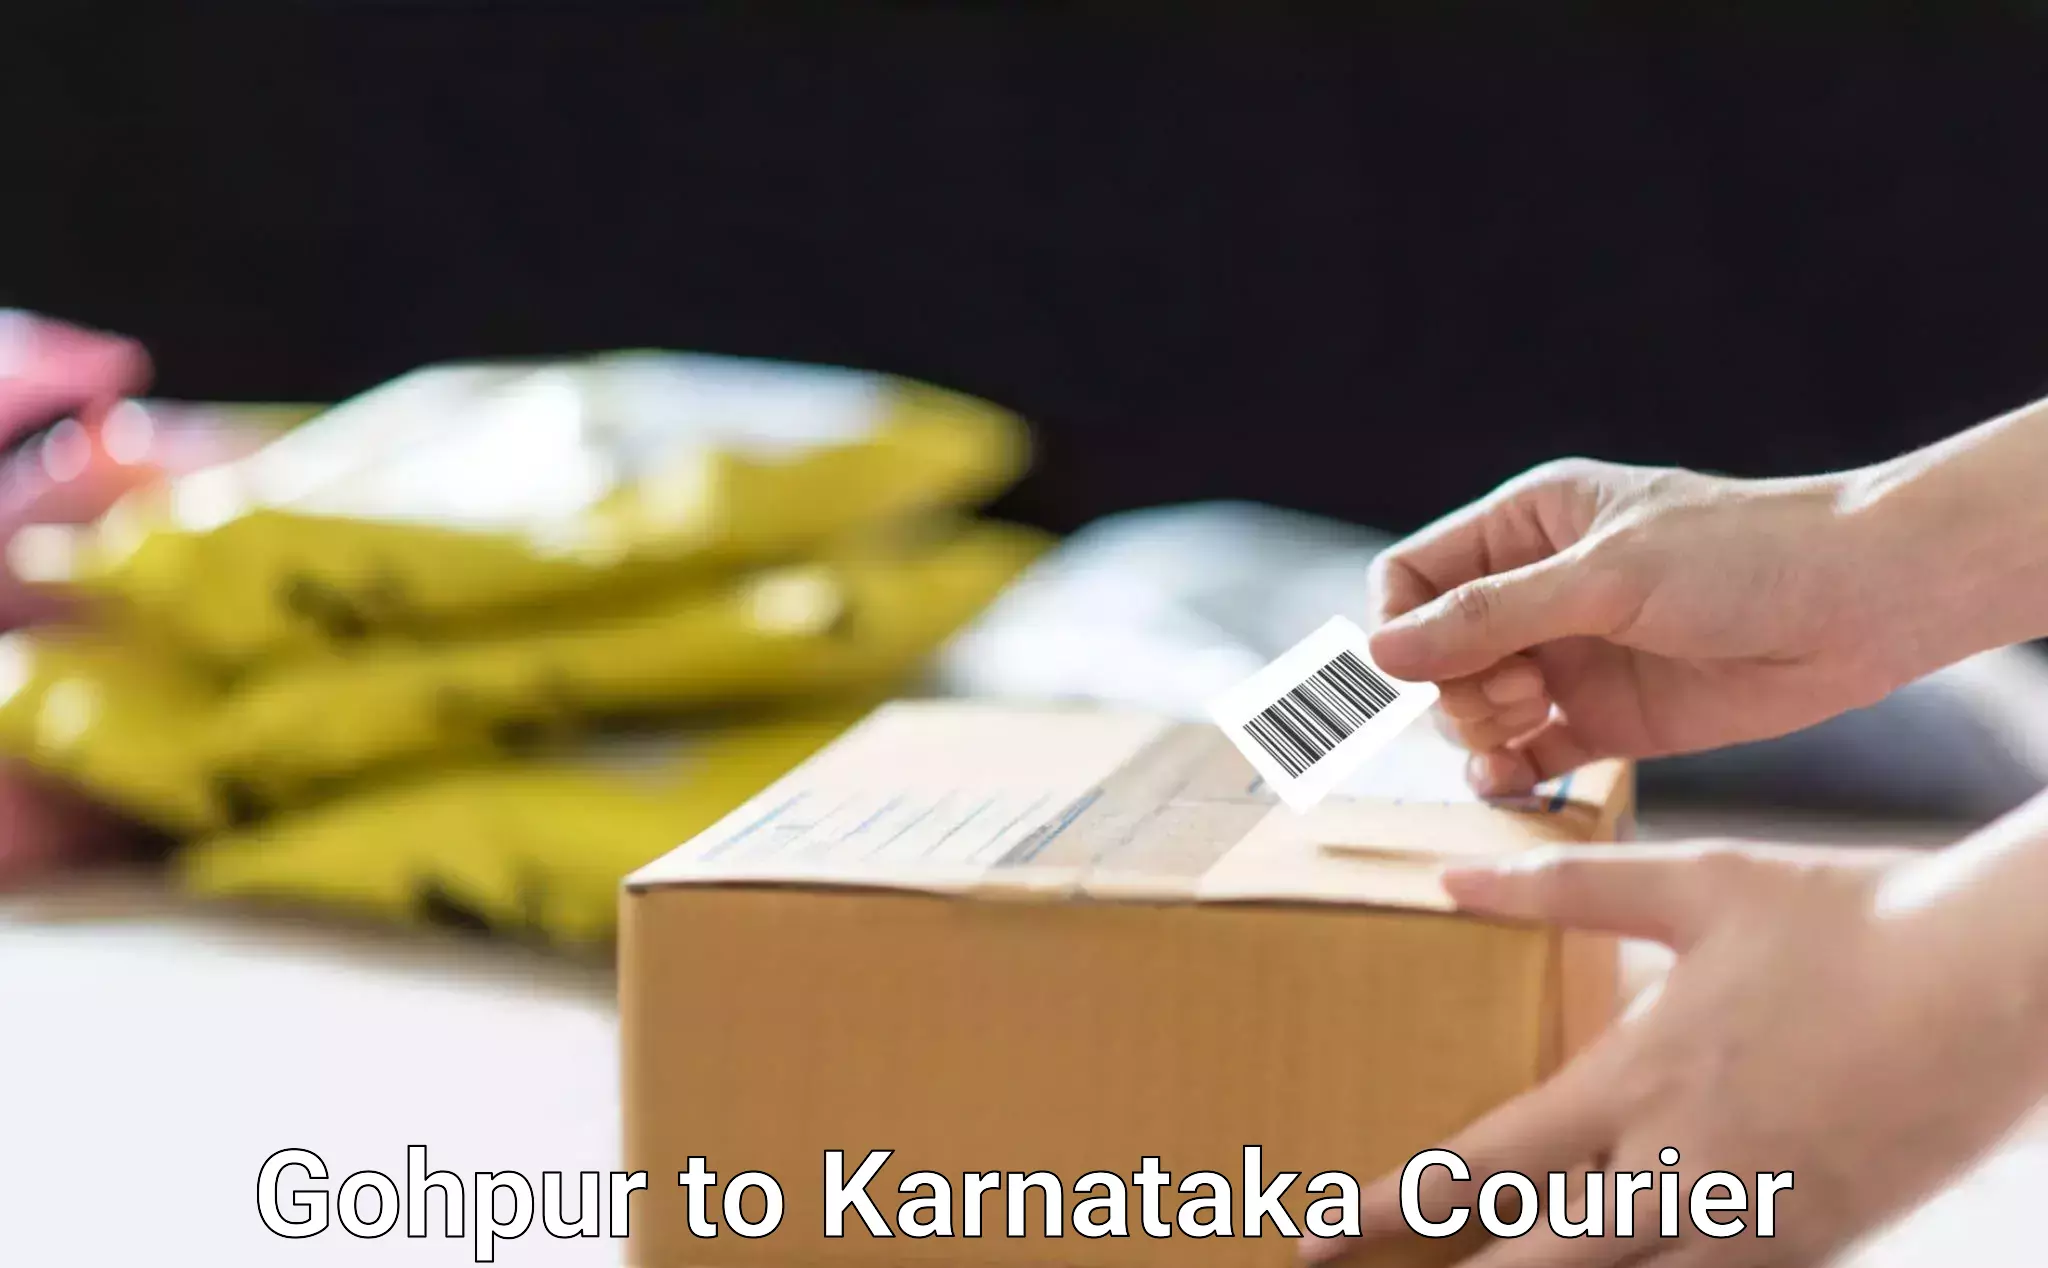 Fast shipping solutions Gohpur to Puttur